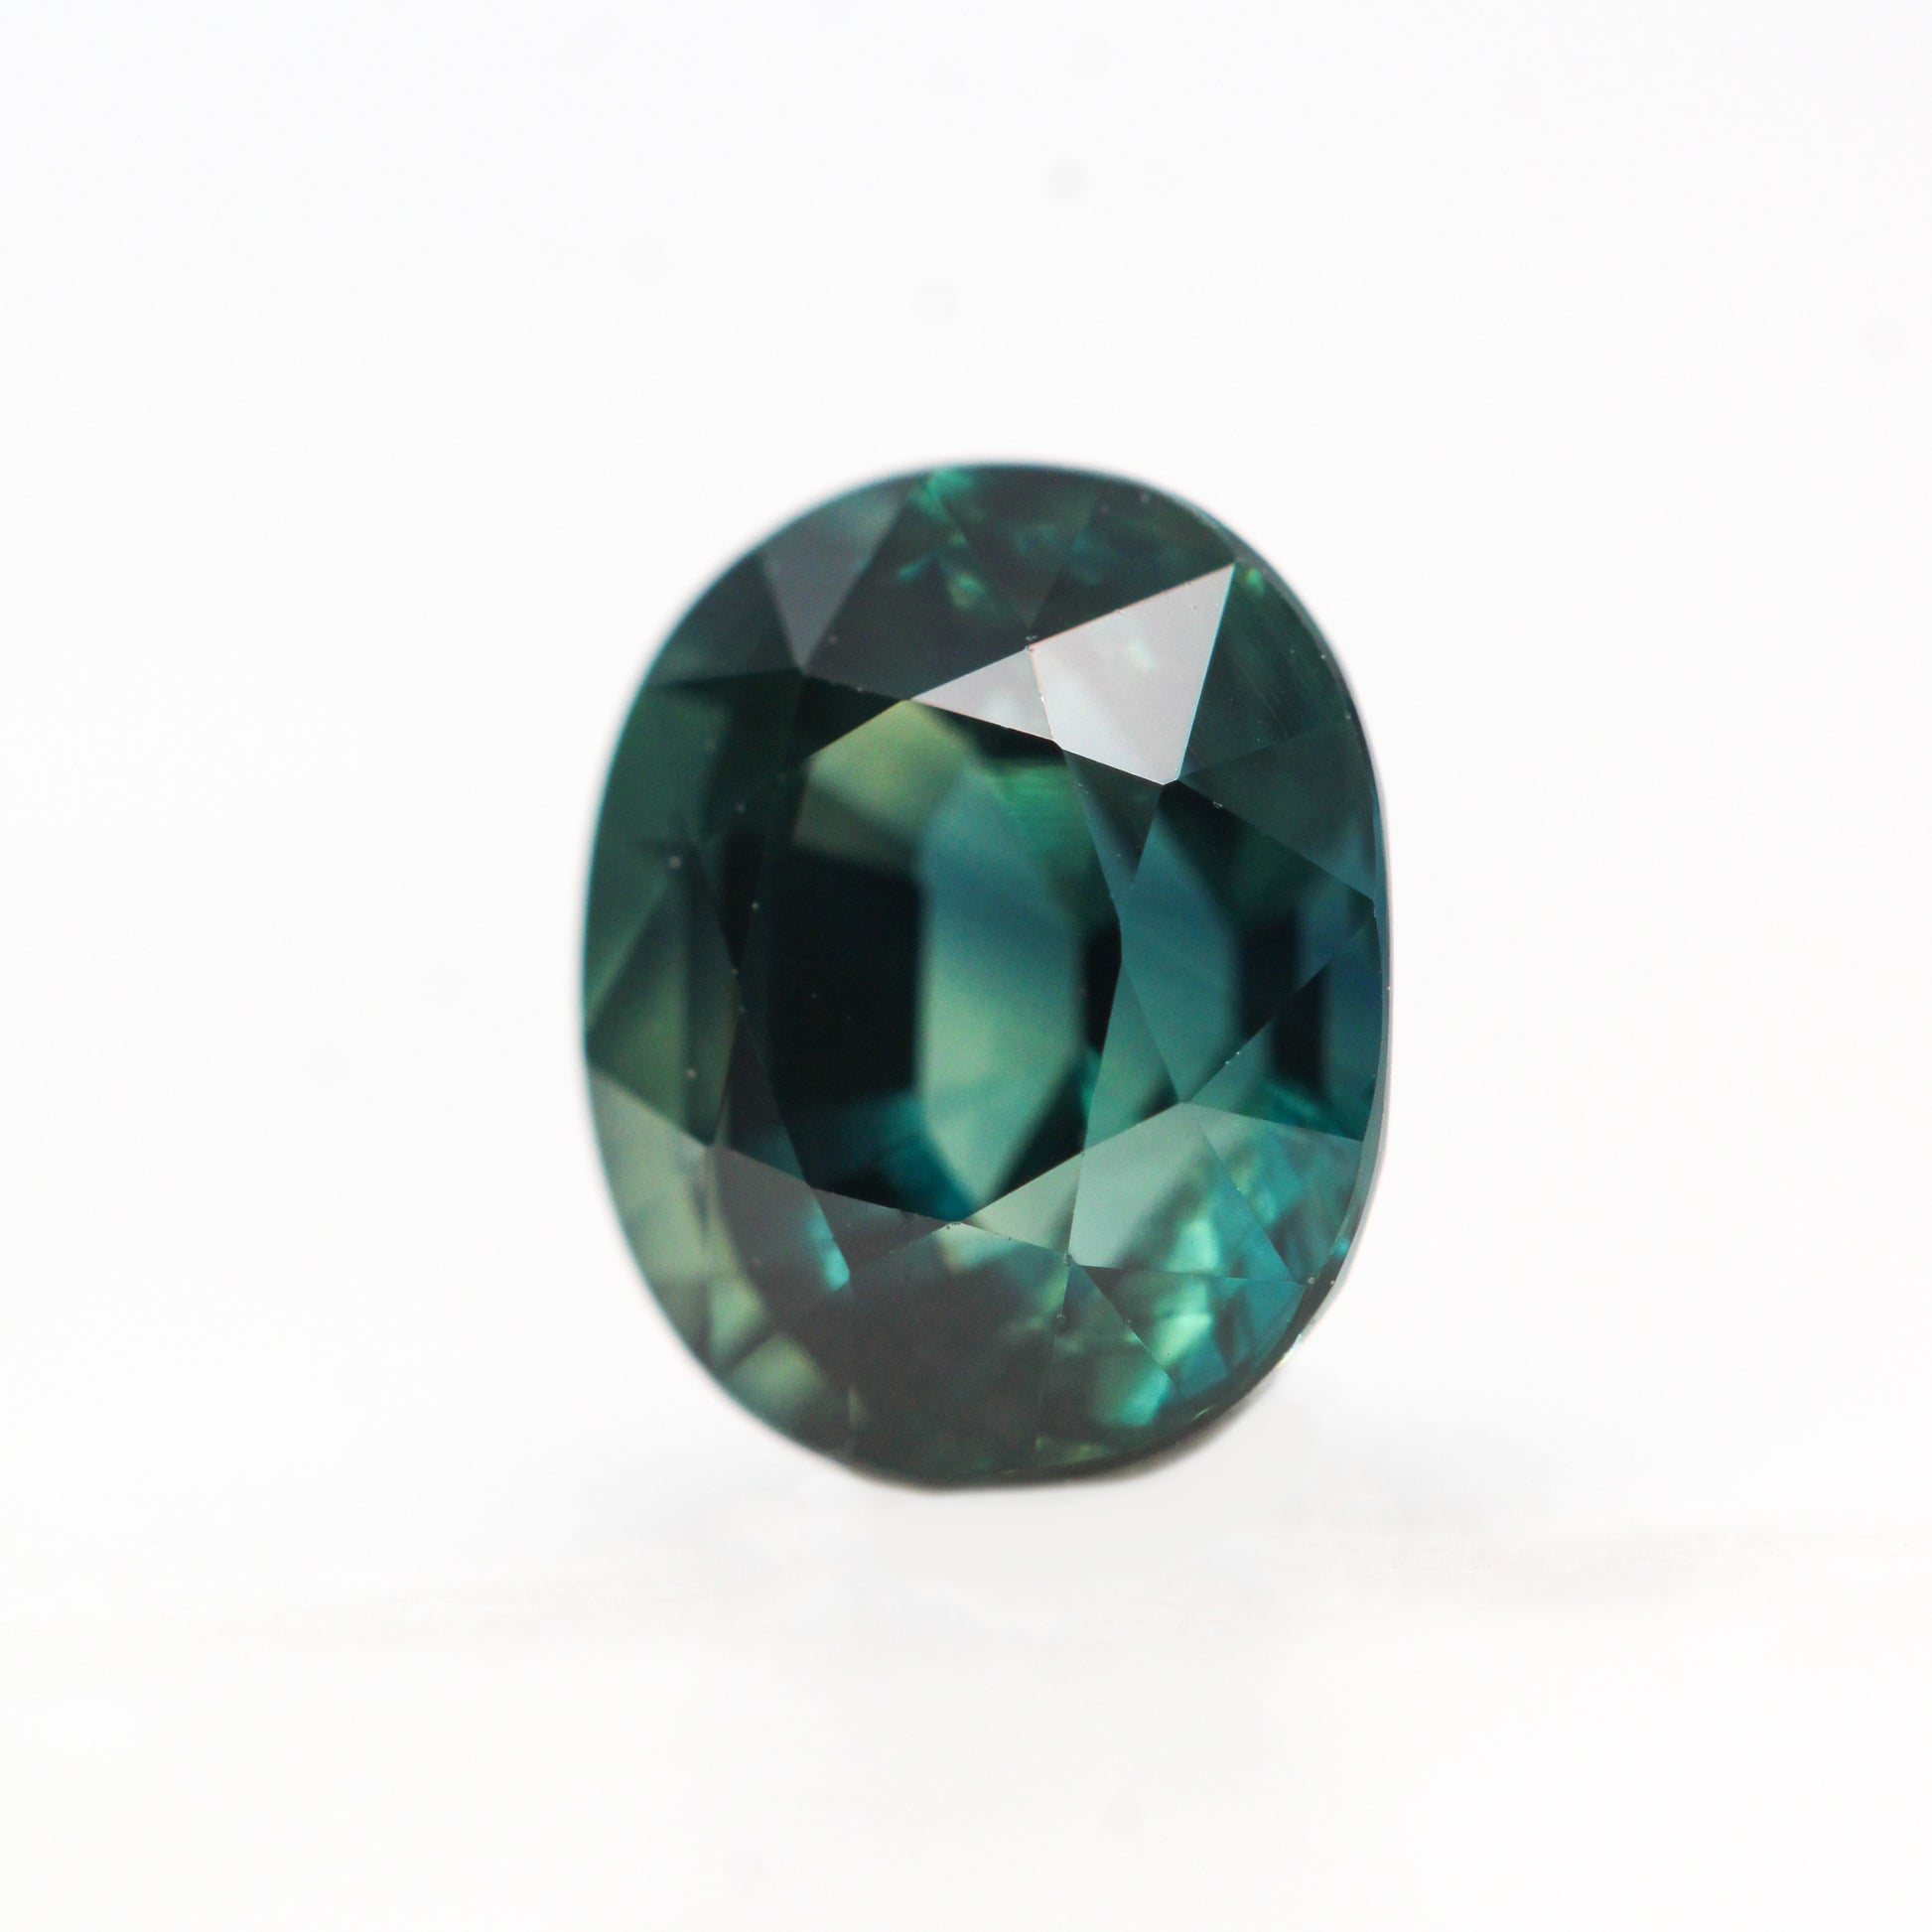 1.60 Carat Teal Oval Australian Sapphire for Custom Work - Inventory Code TOS160 - Midwinter Co. Alternative Bridal Rings and Modern Fine Jewelry